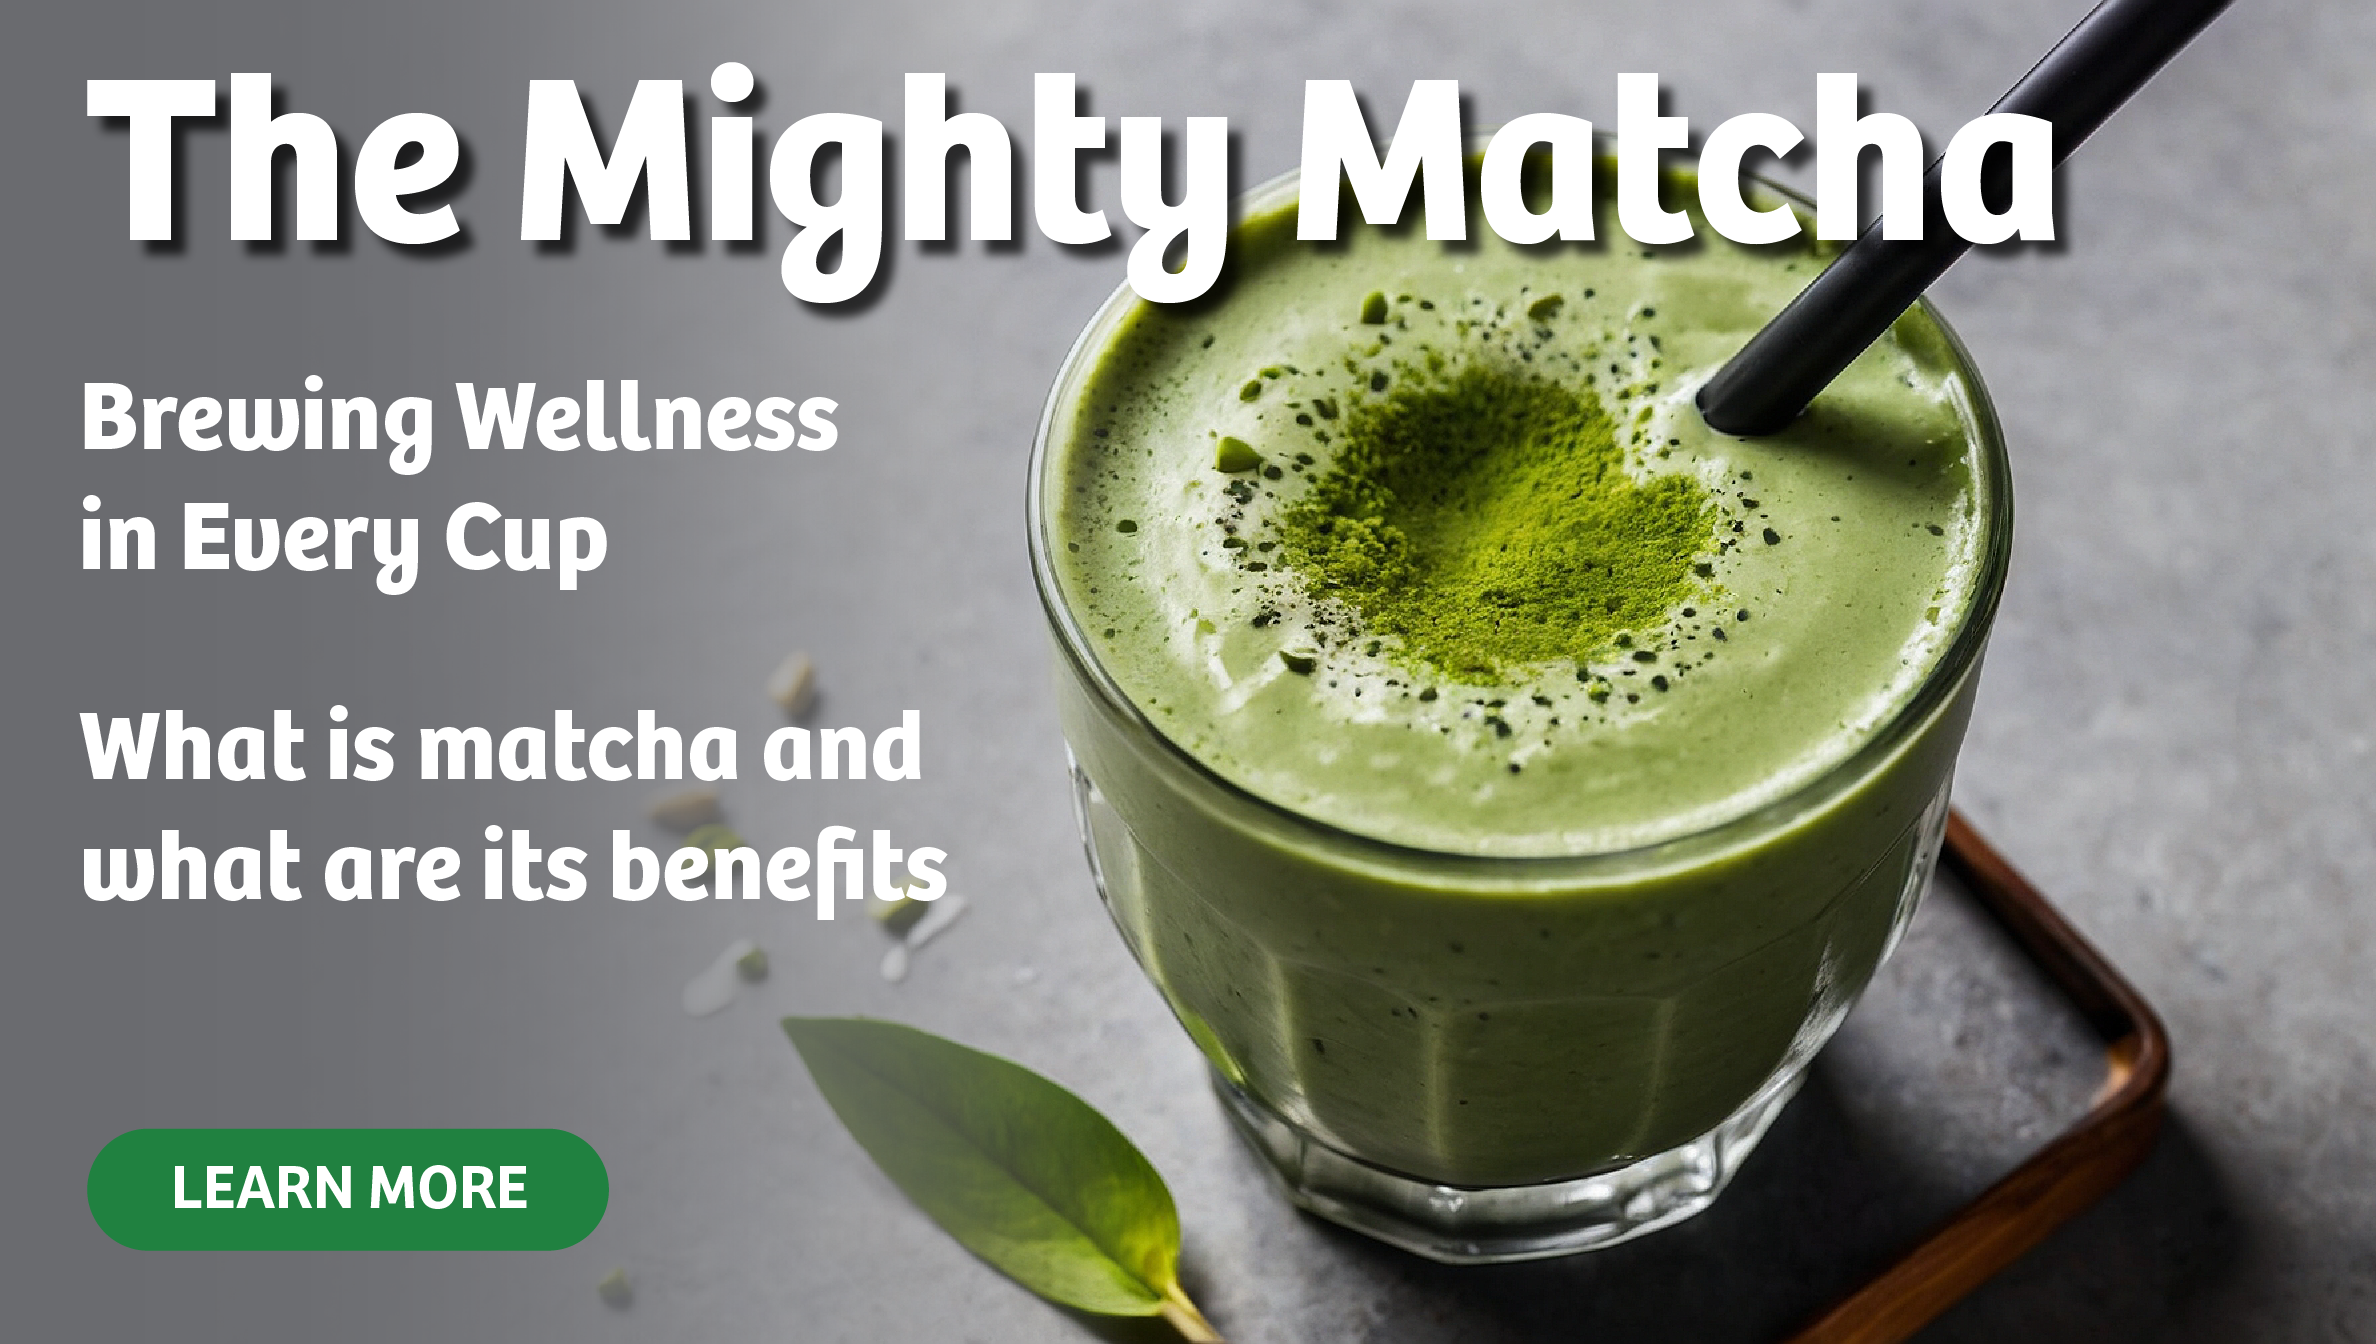 The Mighty Matcha: Brewing Wellness in Every Cup